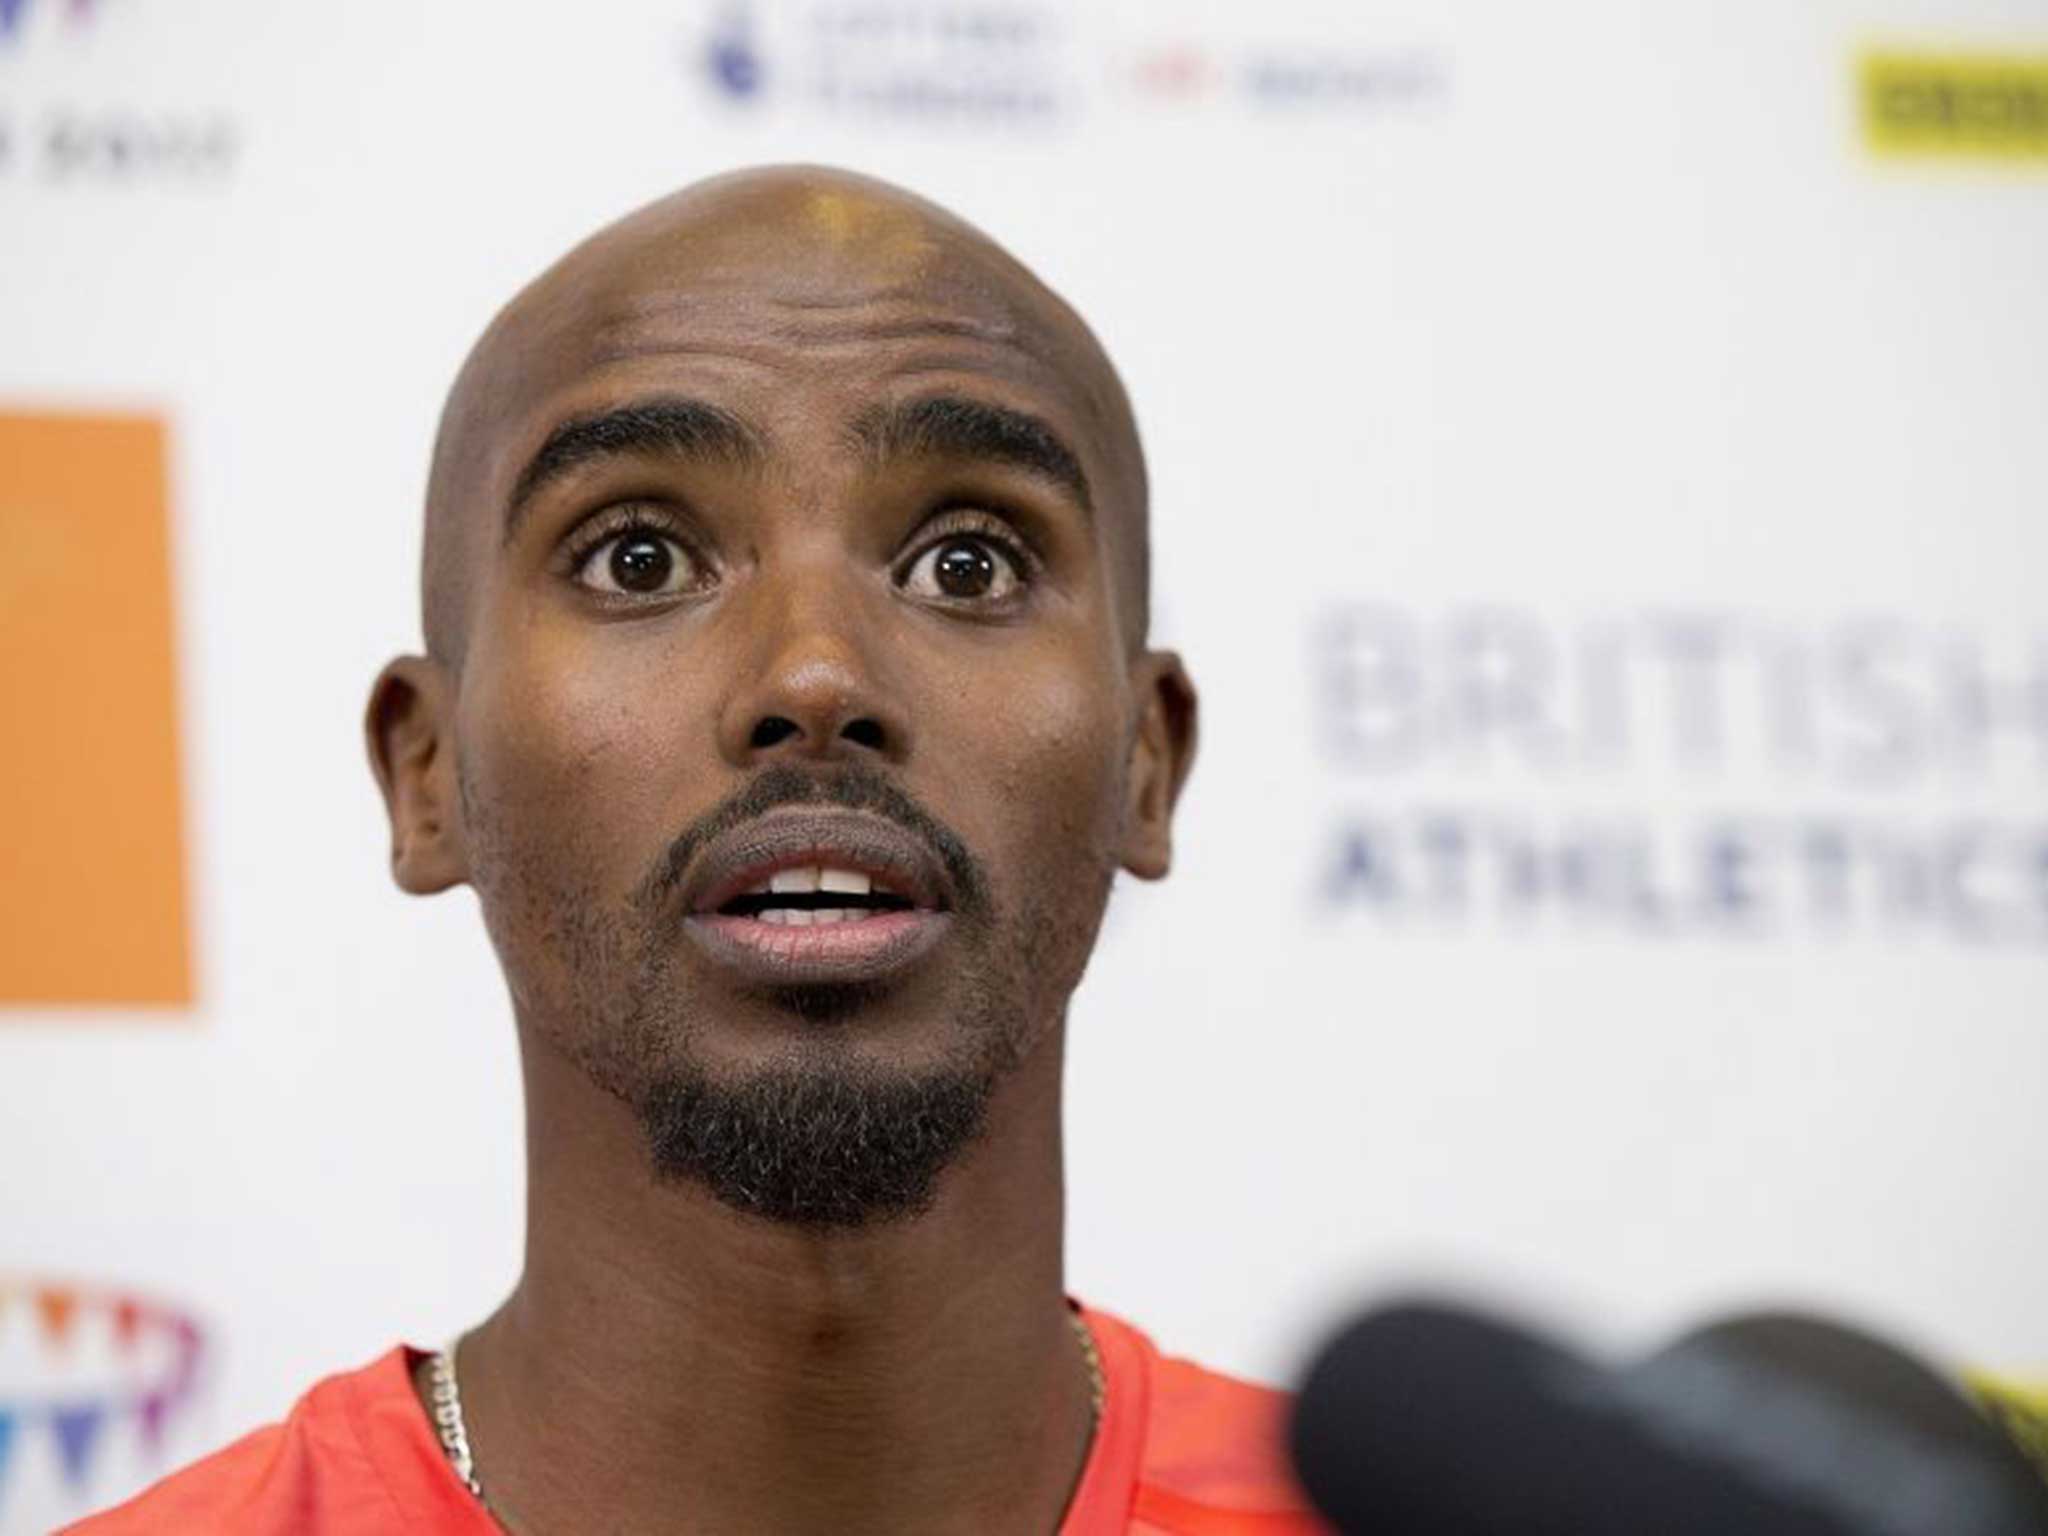 Mo Farah has said he will stand by his coach until he gets further information